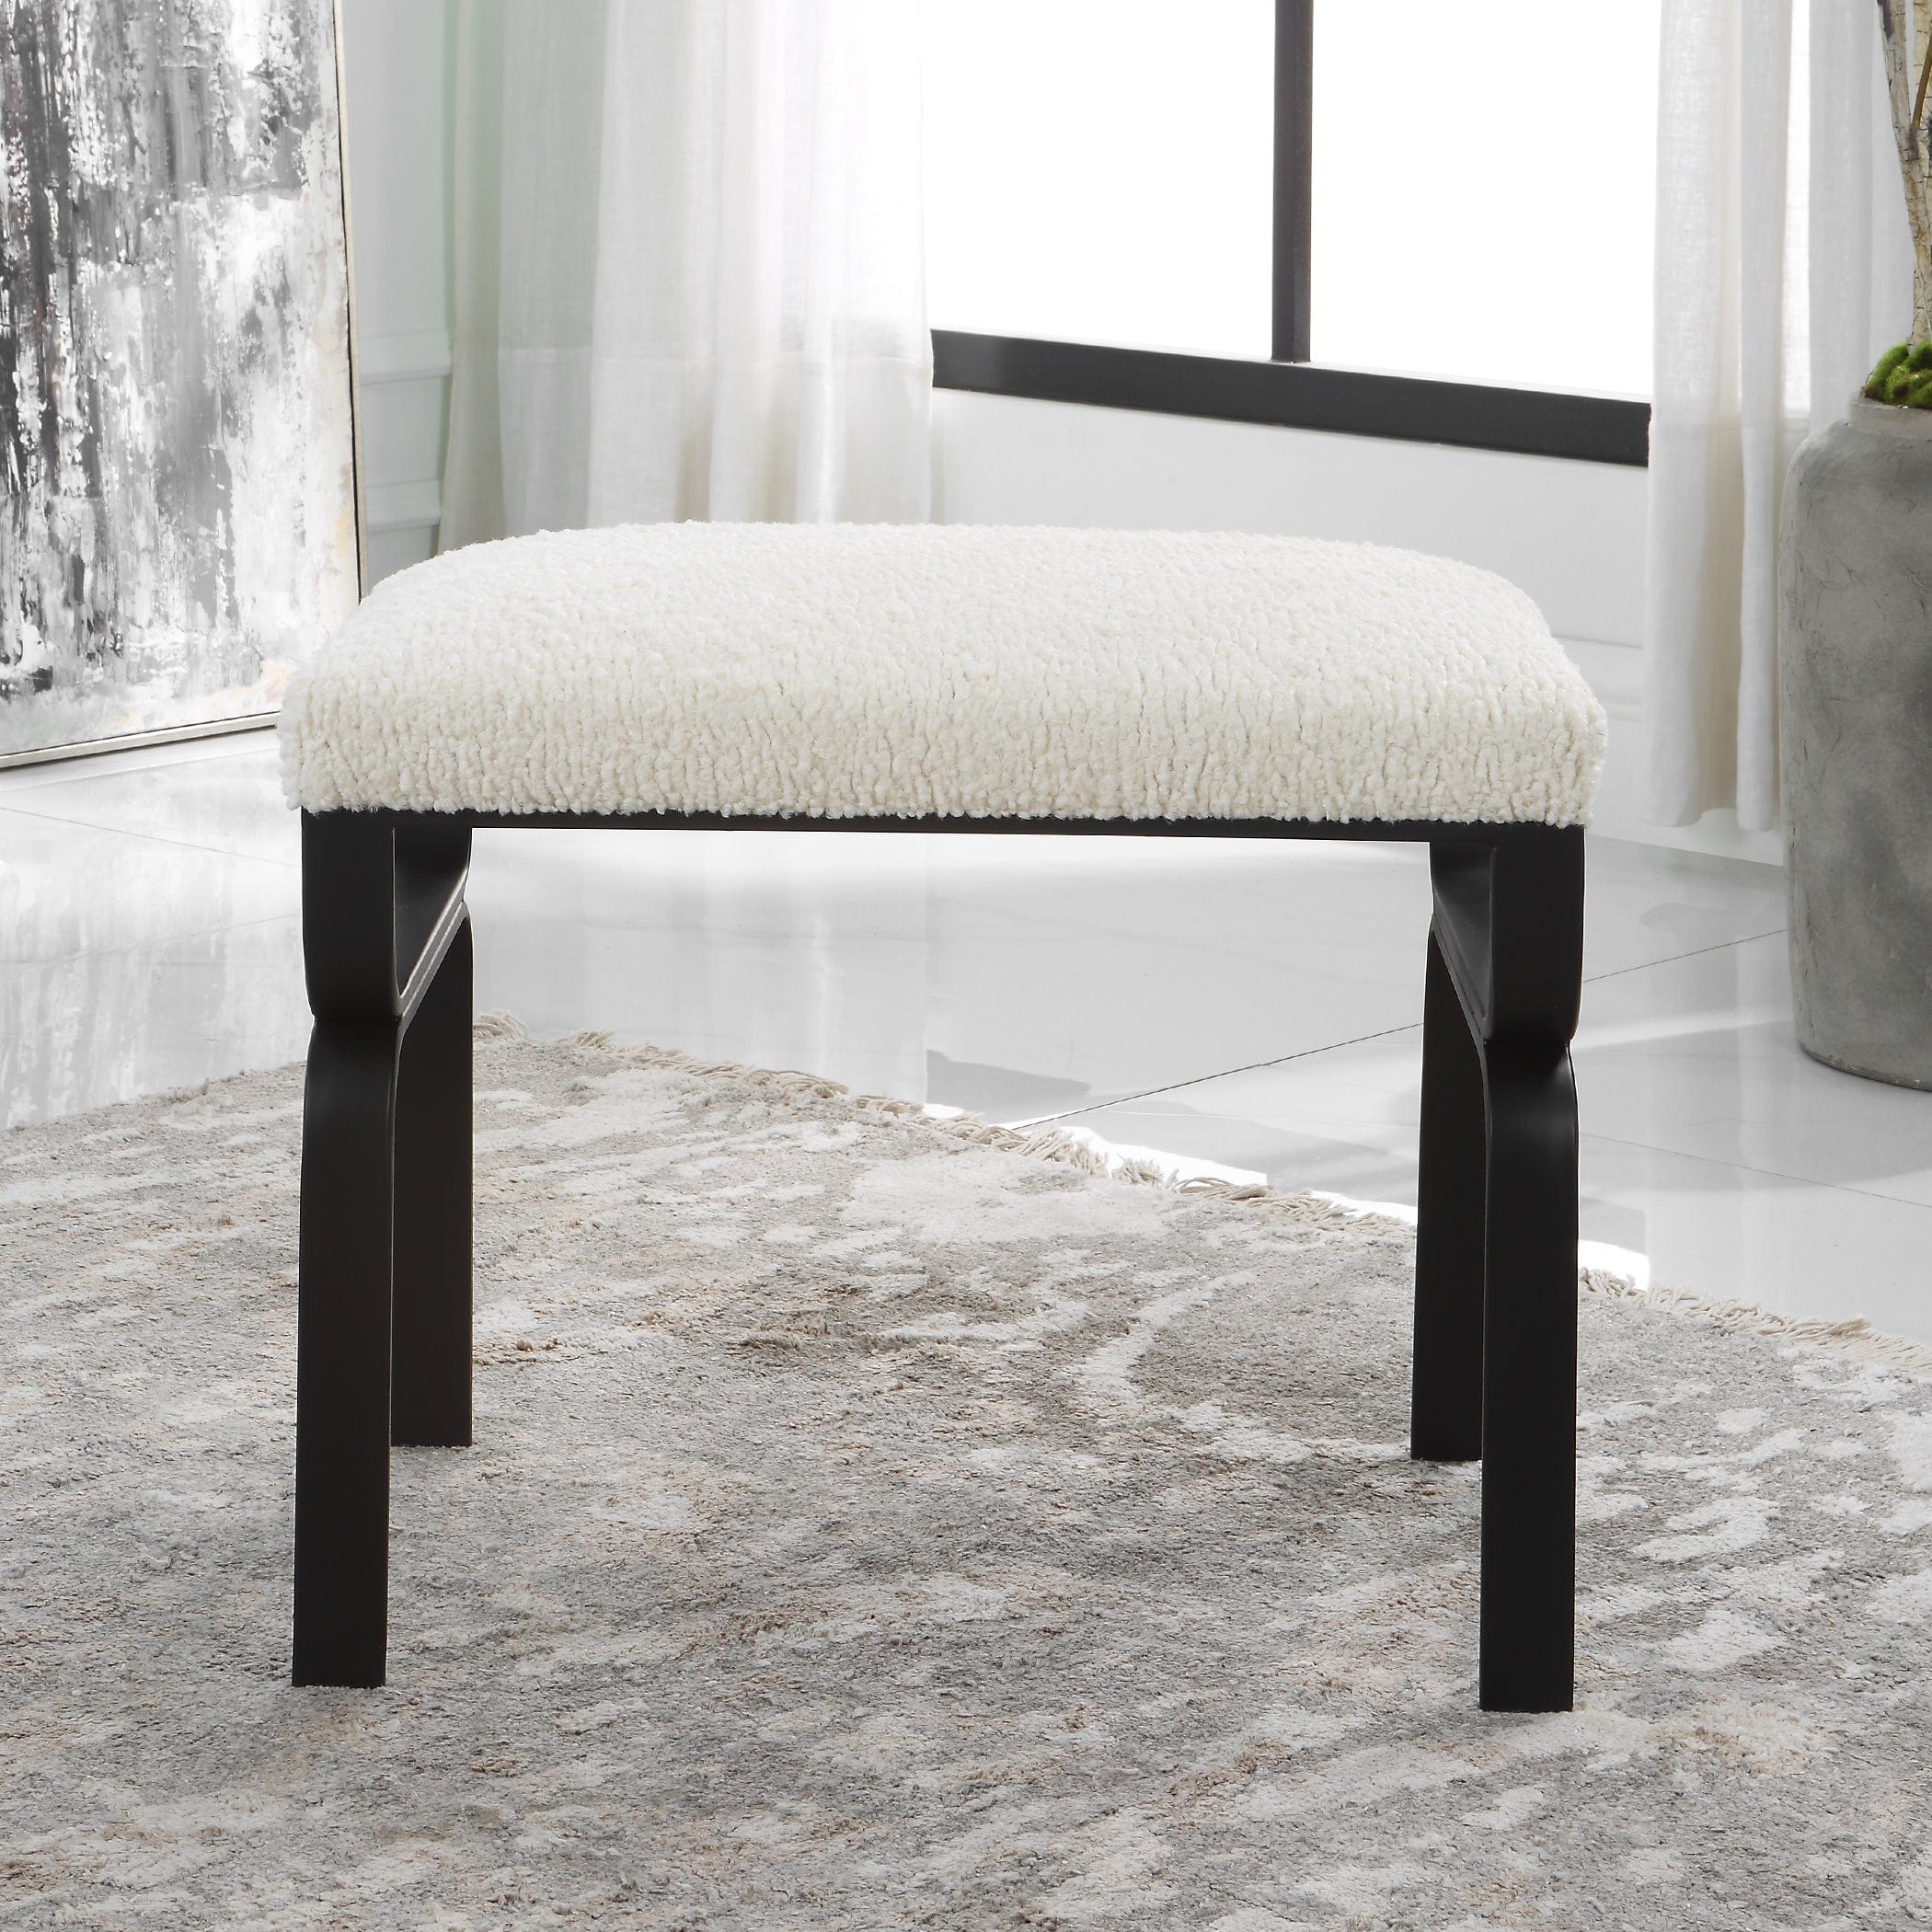 Diverge White Shearling Small Bench Uttermost